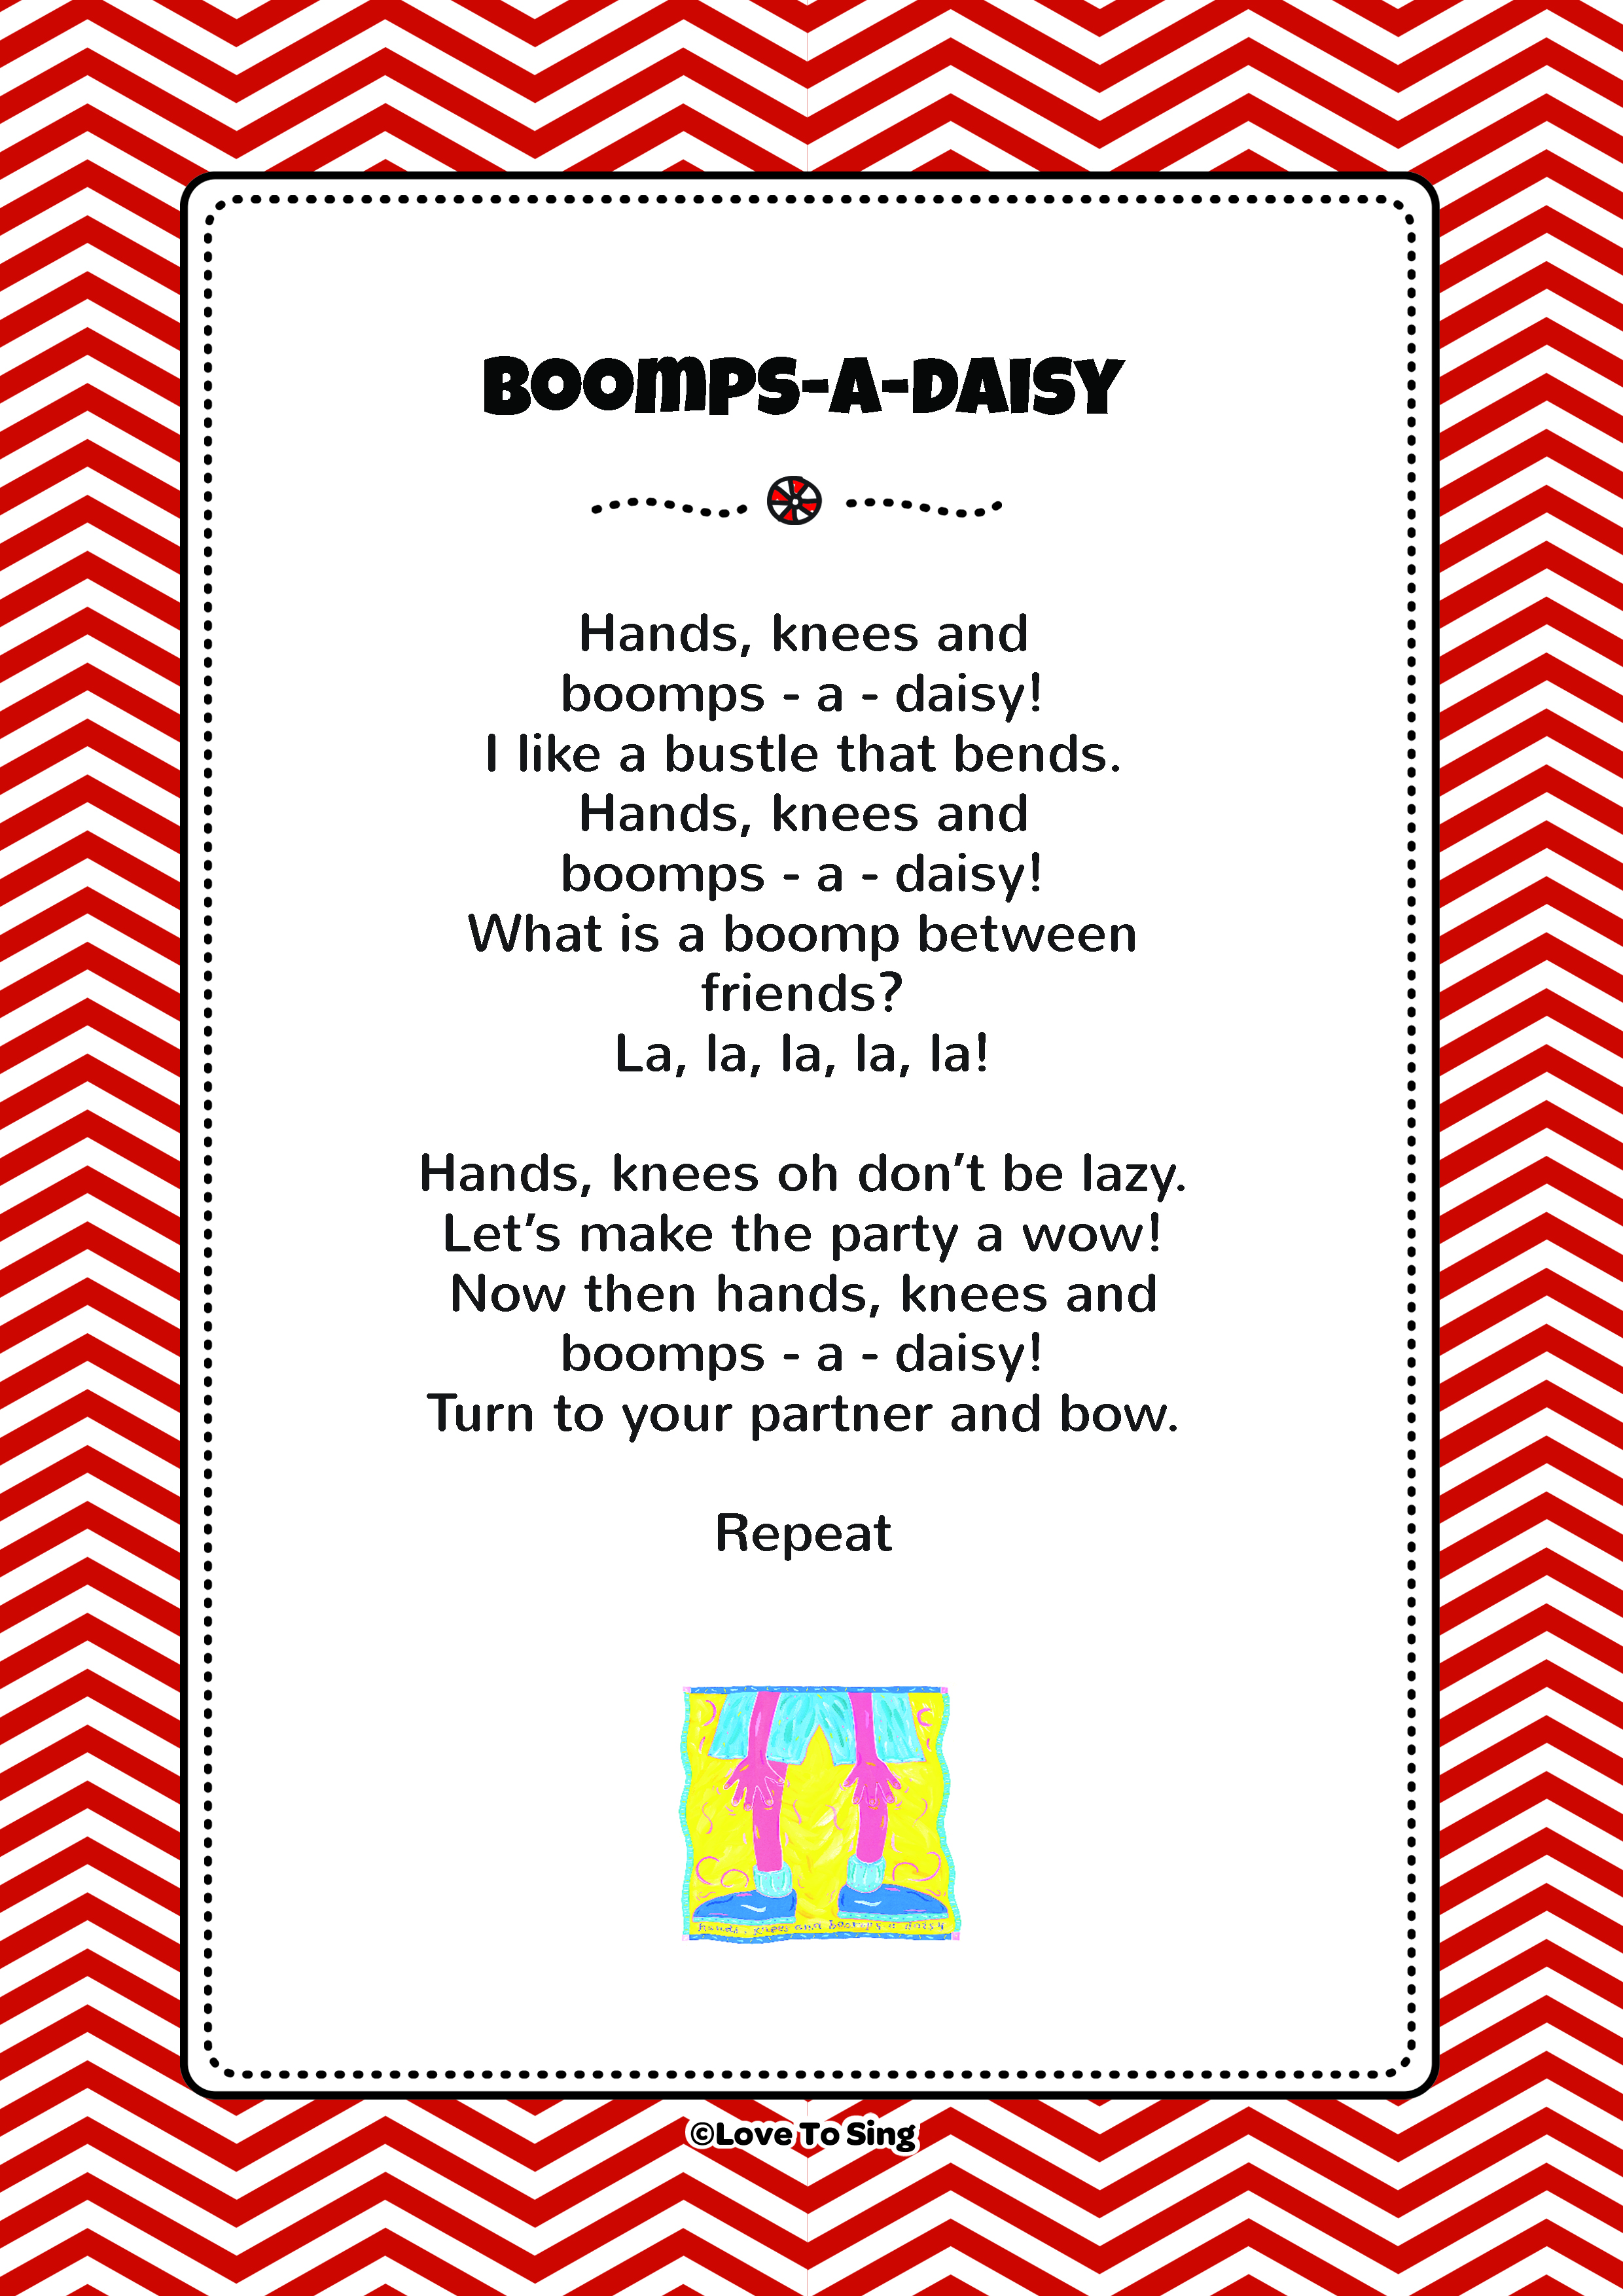 Boomps a Daisy Action Song  FREE Video Song, Lyrics & Activities